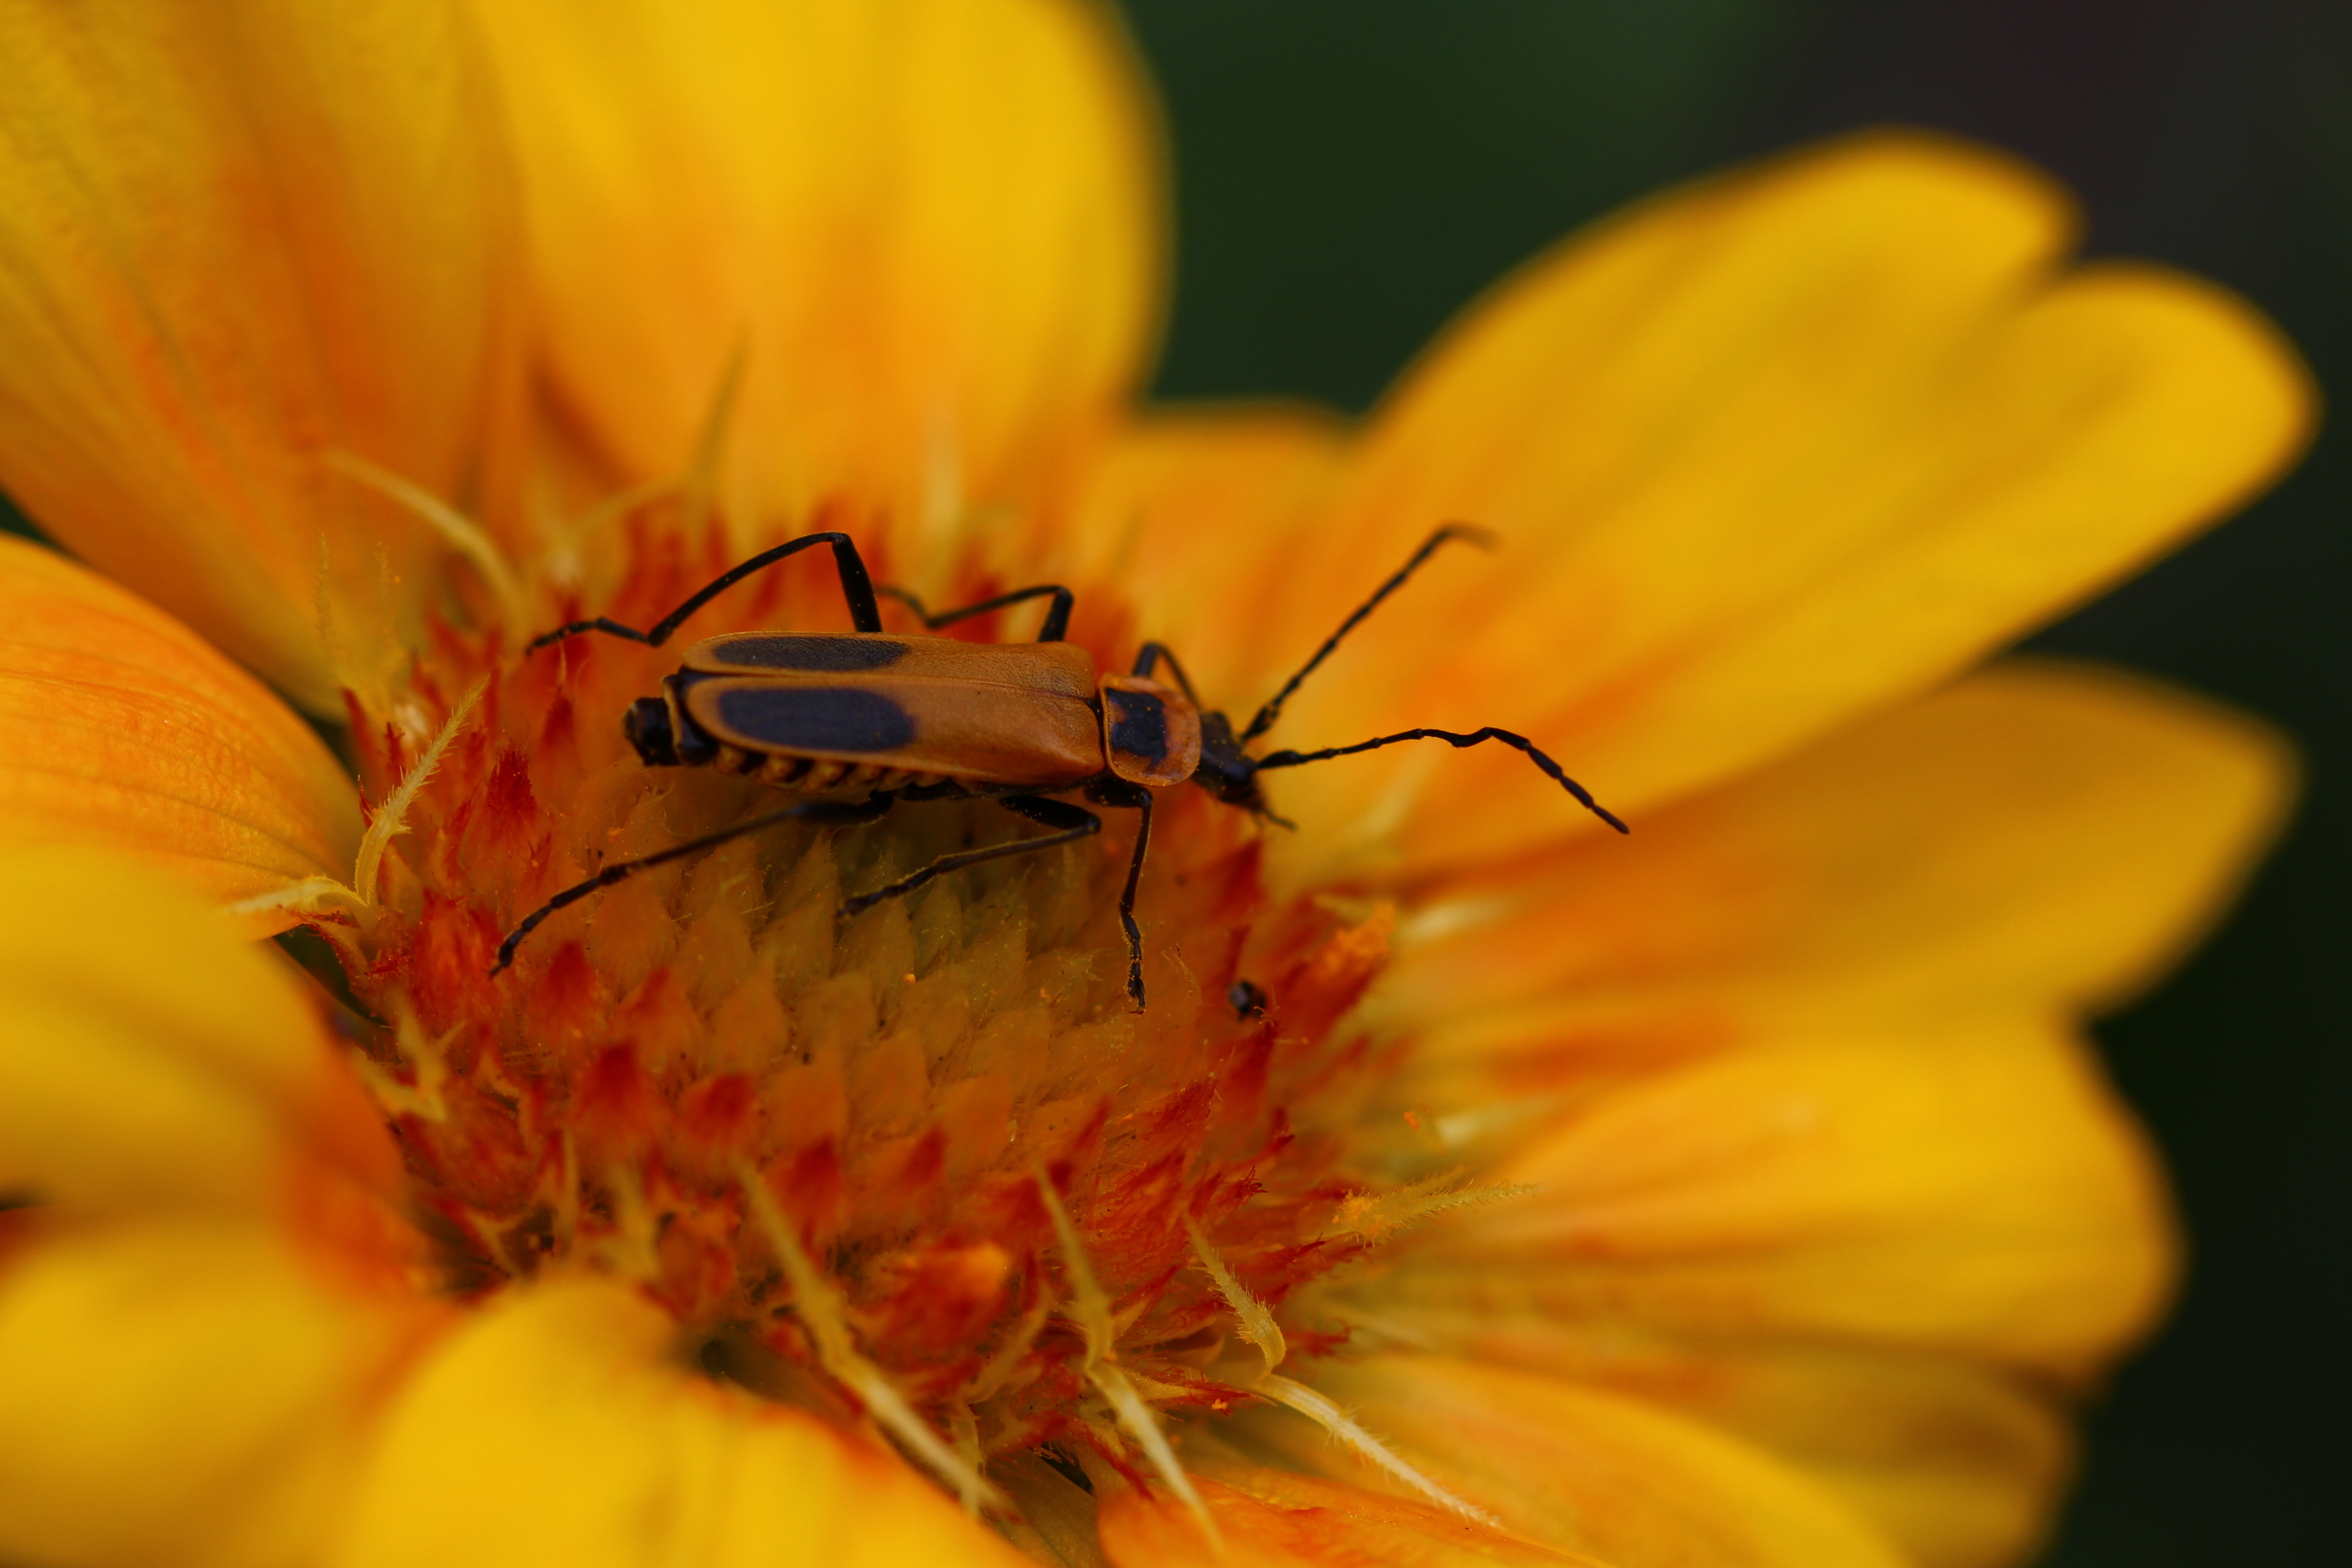 Adult goldenrod soldier beetle sitting on a yellow/orange flower